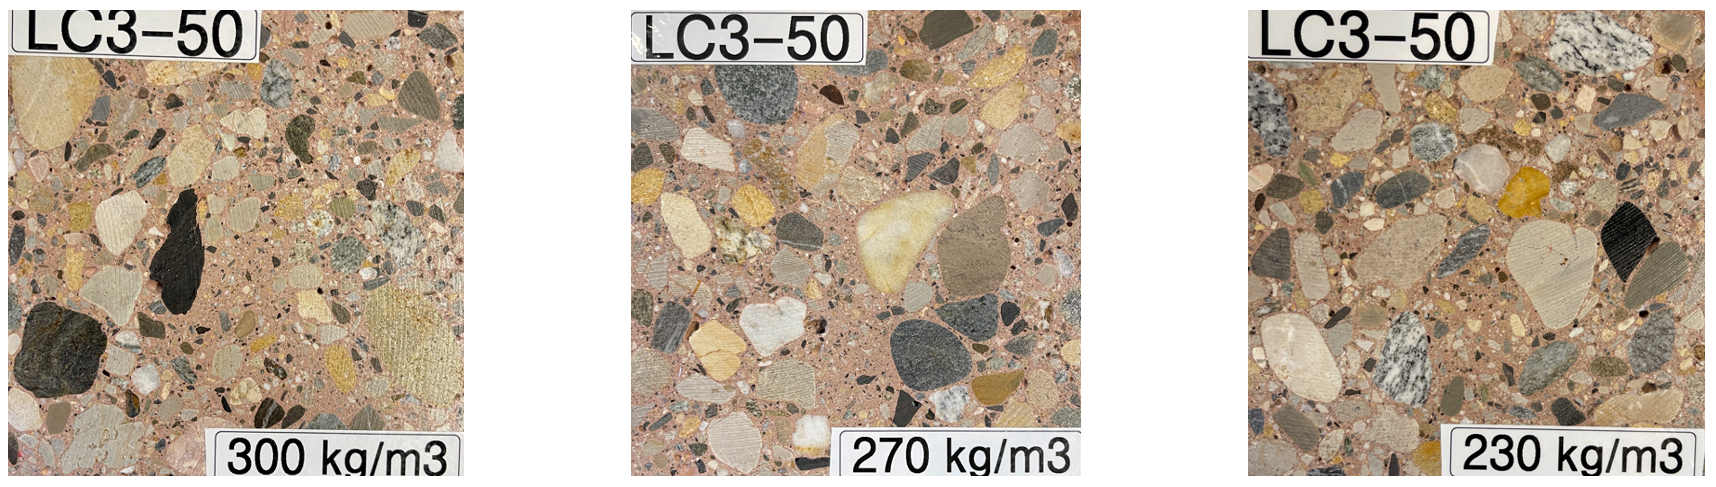 Enlarged view: Three microscope images of the LC3-50 concrete from left to right with decreasing cement content a denser structure can be seen.